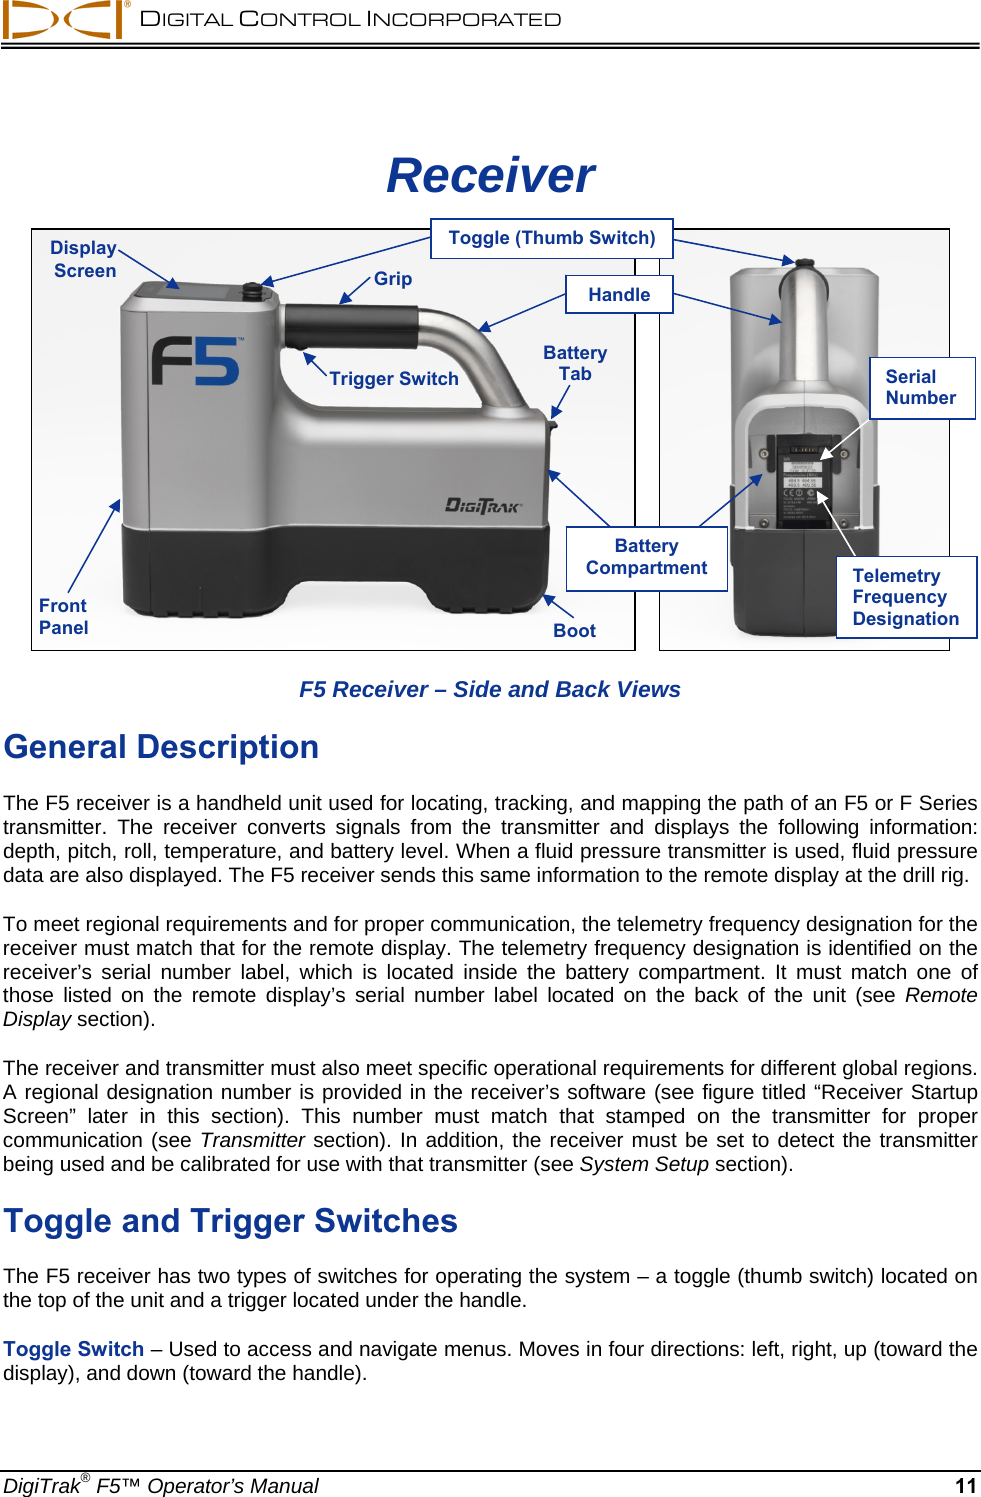  DIGITAL CONTROL INCORPORATED  DigiTrak® F5™ Operator’s Manual 11 Receiver       F5 Receiver – Side and Back Views General Description The F5 receiver is a handheld unit used for locating, tracking, and mapping the path of an F5 or F Series transmitter. The receiver converts signals from the transmitter and displays the following information: depth, pitch, roll, temperature, and battery level. When a fluid pressure transmitter is used, fluid pressure data are also displayed. The F5 receiver sends this same information to the remote display at the drill rig.  To meet regional requirements and for proper communication, the telemetry frequency designation for the receiver must match that for the remote display. The telemetry frequency designation is identified on the receiver’s serial number label, which is located inside the battery compartment. It must match one of those listed on the remote display’s serial number label located on the back of the unit (see Remote Display section). The receiver and transmitter must also meet specific operational requirements for different global regions. A regional designation number is provided in the receiver’s software (see figure titled “Receiver Startup Screen” later in this section). This number must match that stamped on the transmitter for proper communication (see Transmitter section). In addition, the receiver must be set to detect the transmitter being used and be calibrated for use with that transmitter (see System Setup section). Toggle and Trigger Switches The F5 receiver has two types of switches for operating the system – a toggle (thumb switch) located on the top of the unit and a trigger located under the handle.  Toggle Switch – Used to access and navigate menus. Moves in four directions: left, right, up (toward the display), and down (toward the handle).  Trigger SwitchFront Panel  BootBatteryTab Display Screen  GripBattery Compartment Toggle (Thumb Switch)Telemetry Frequency Designation Serial Number Handle